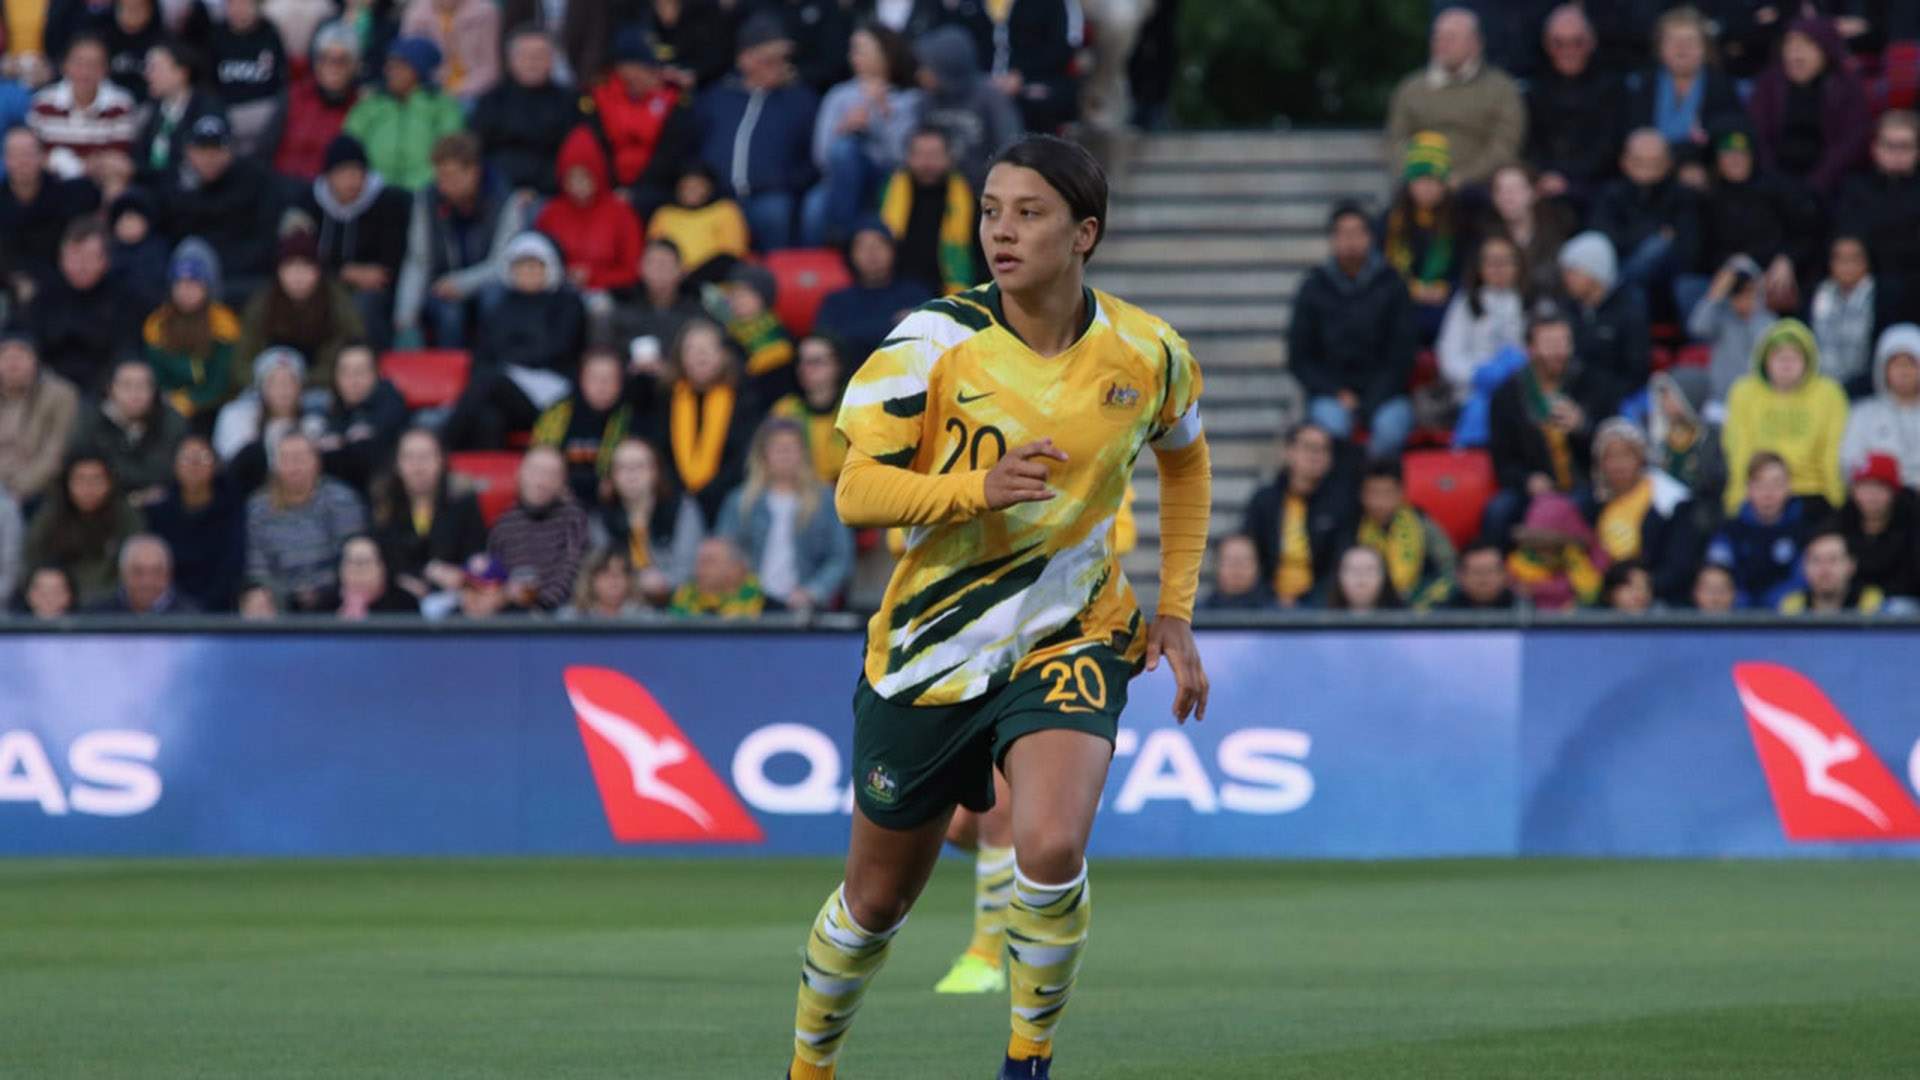 The Matildas' Semi-Final Against England Was Australia's Most-Watched TV Program Since 2001